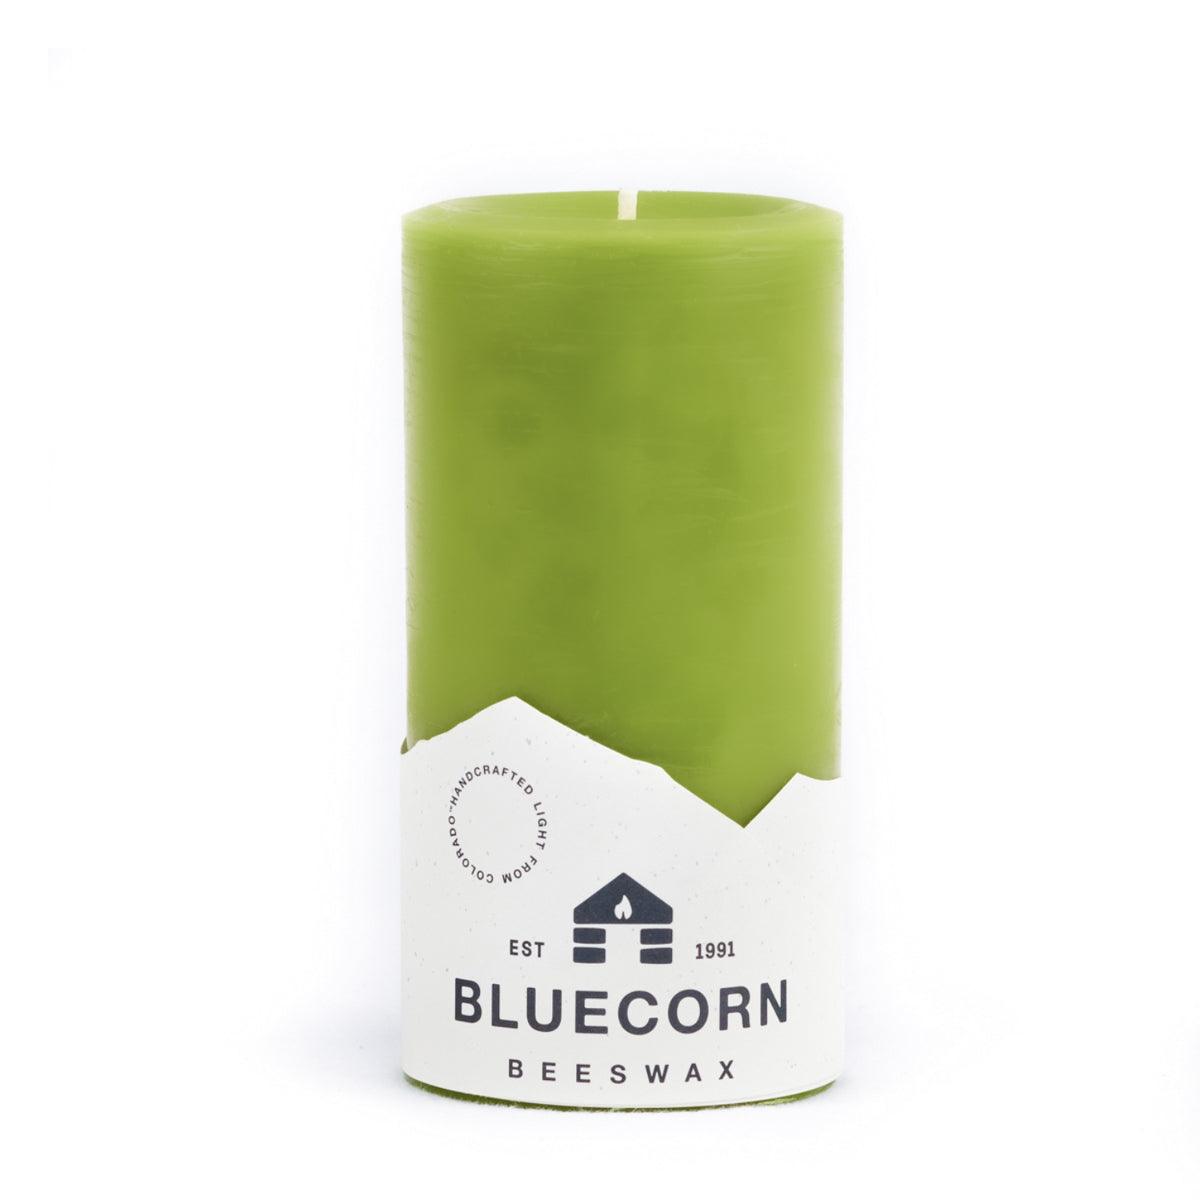 Bluecorn Beeswax 100% Pure Beeswax 3" x 6" Colored Pillar Candle is Pistachio in color. Burn Time: 90 hours. Made with 100% Pure Beeswax, is . Made with 100% pure cotton wick, no lead and paraffin free. Clean burning and non-toxic. Features Bluecorn Beeswax label printed on 100% recycled paper.